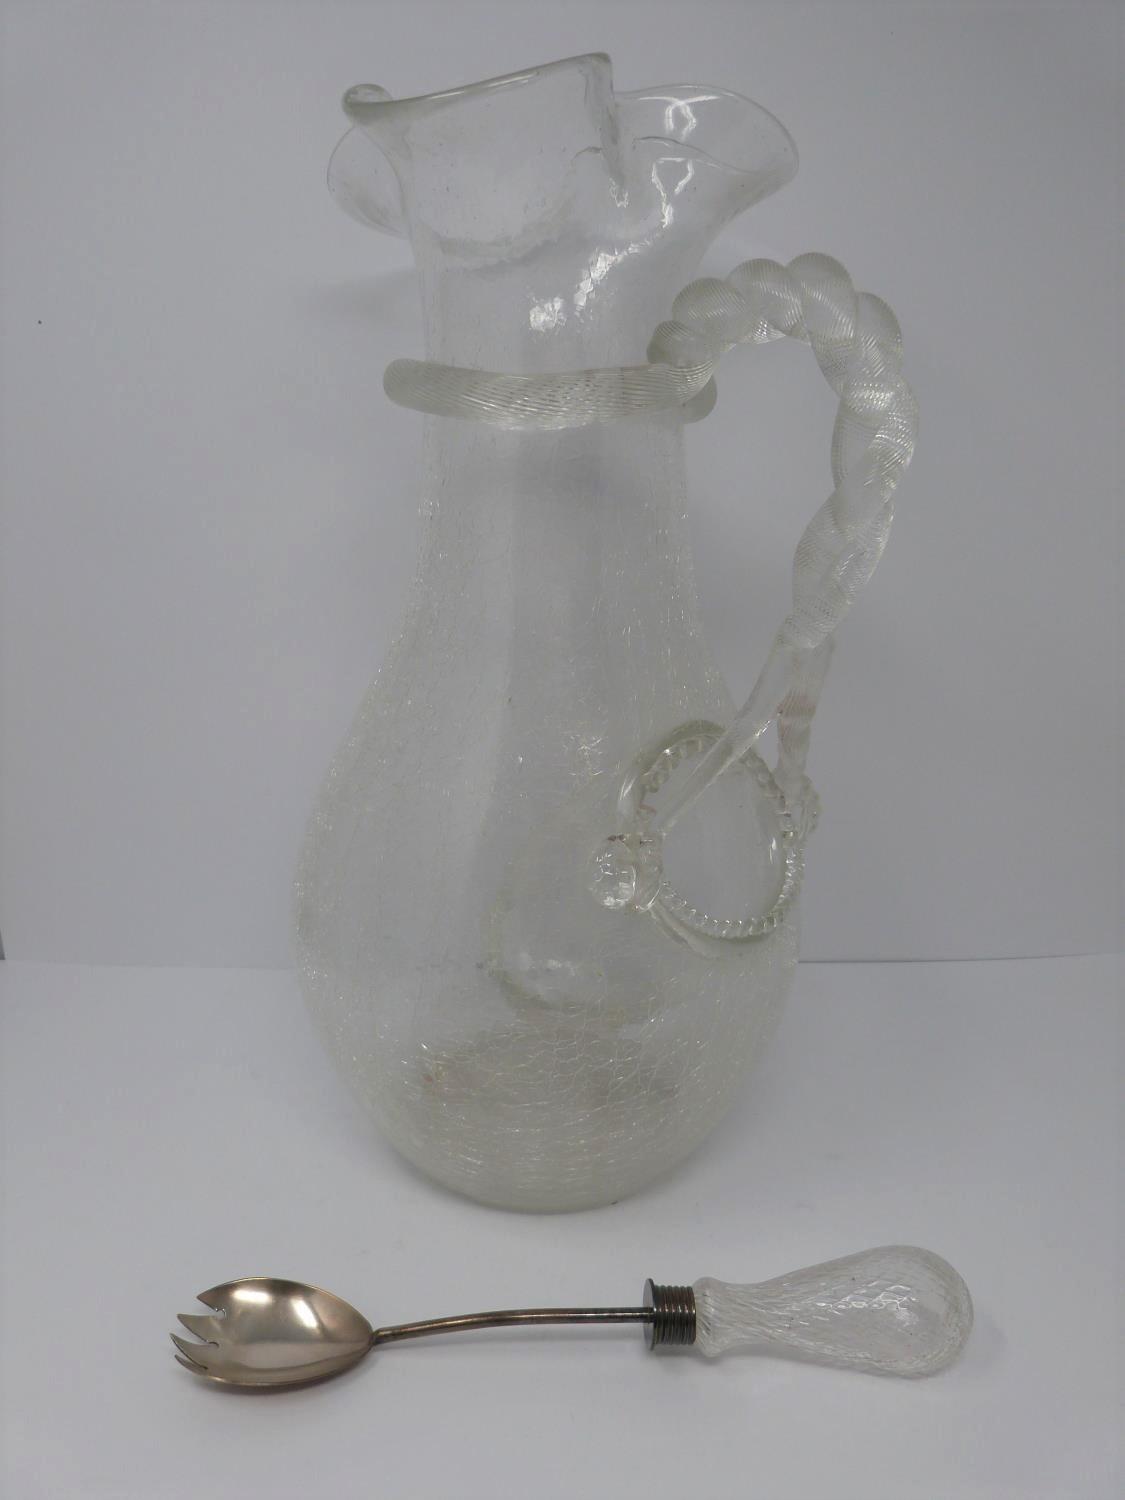 Antique crackle glass champagne pitcher and blown glass handle ice scoop, 1870, by Boston and